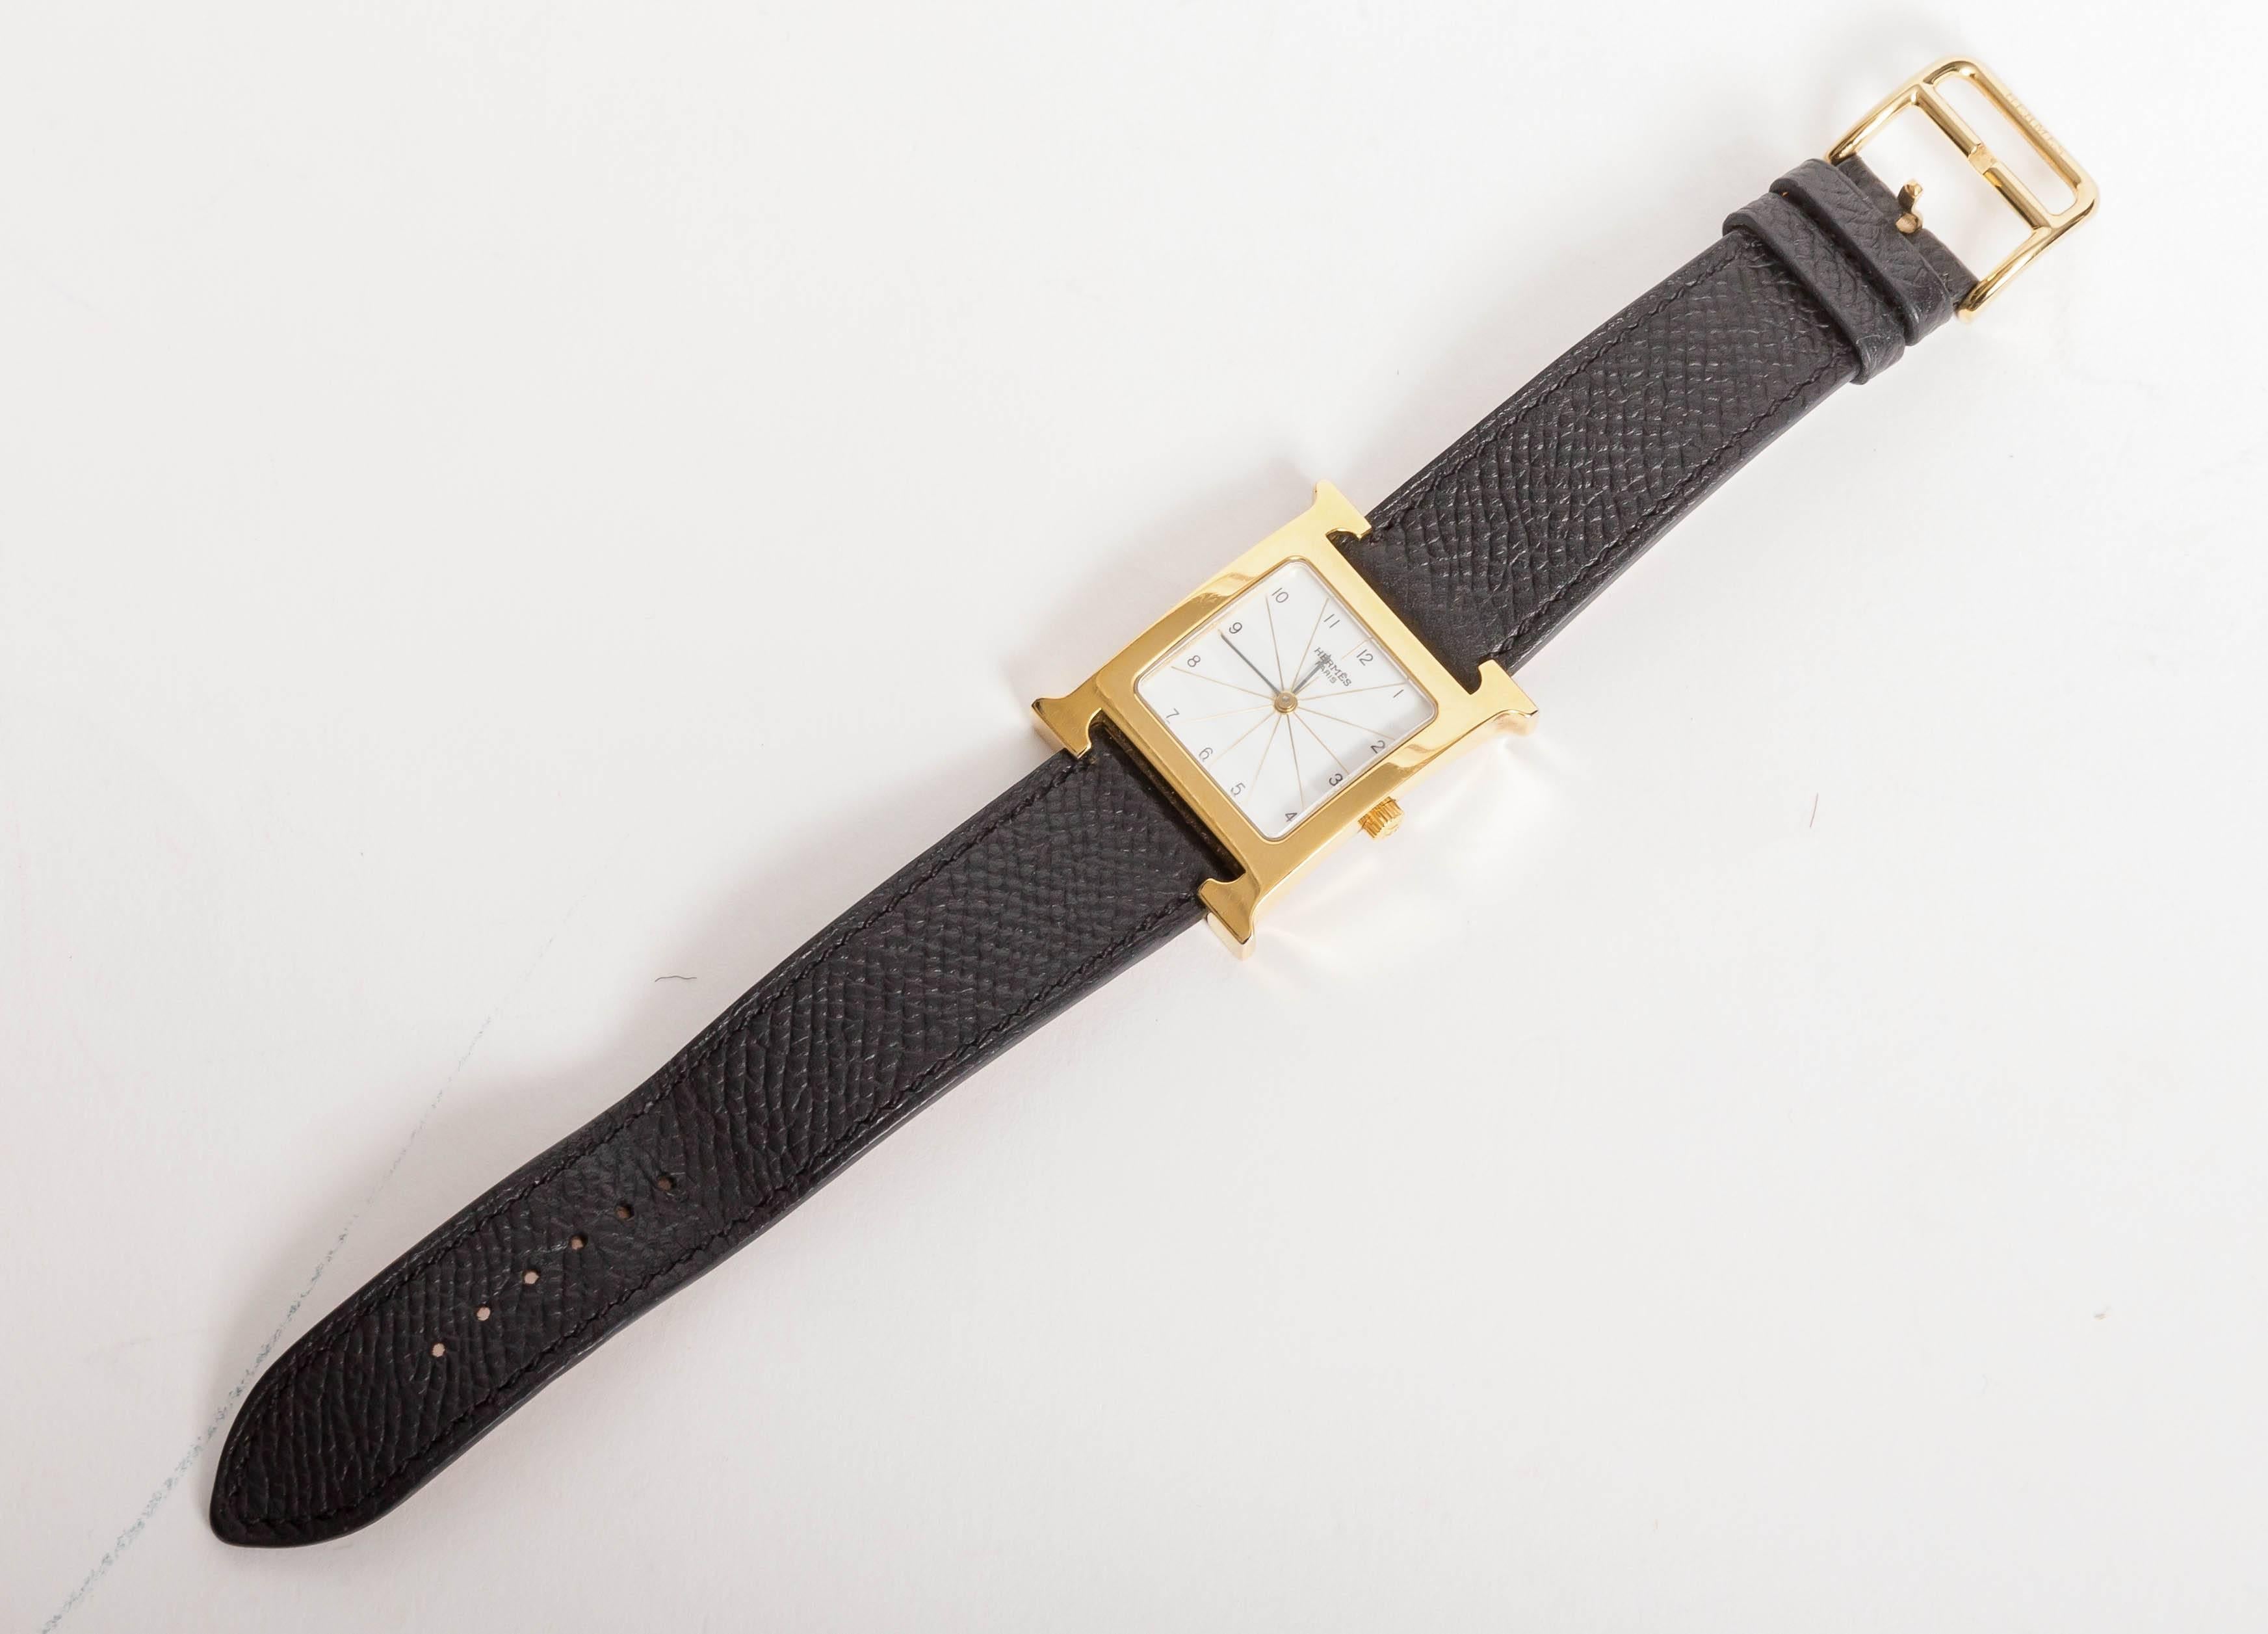 Classic Hermes Heure H Watch in Goldtone Stainless Steel
Model HH1.501
Grained leather strap is blind stamped BRACELET HERMES with N in a square denoting the year 2010.
Does not include Hermes box.
Face measures 21 mm x 21 mm
Excellent working order